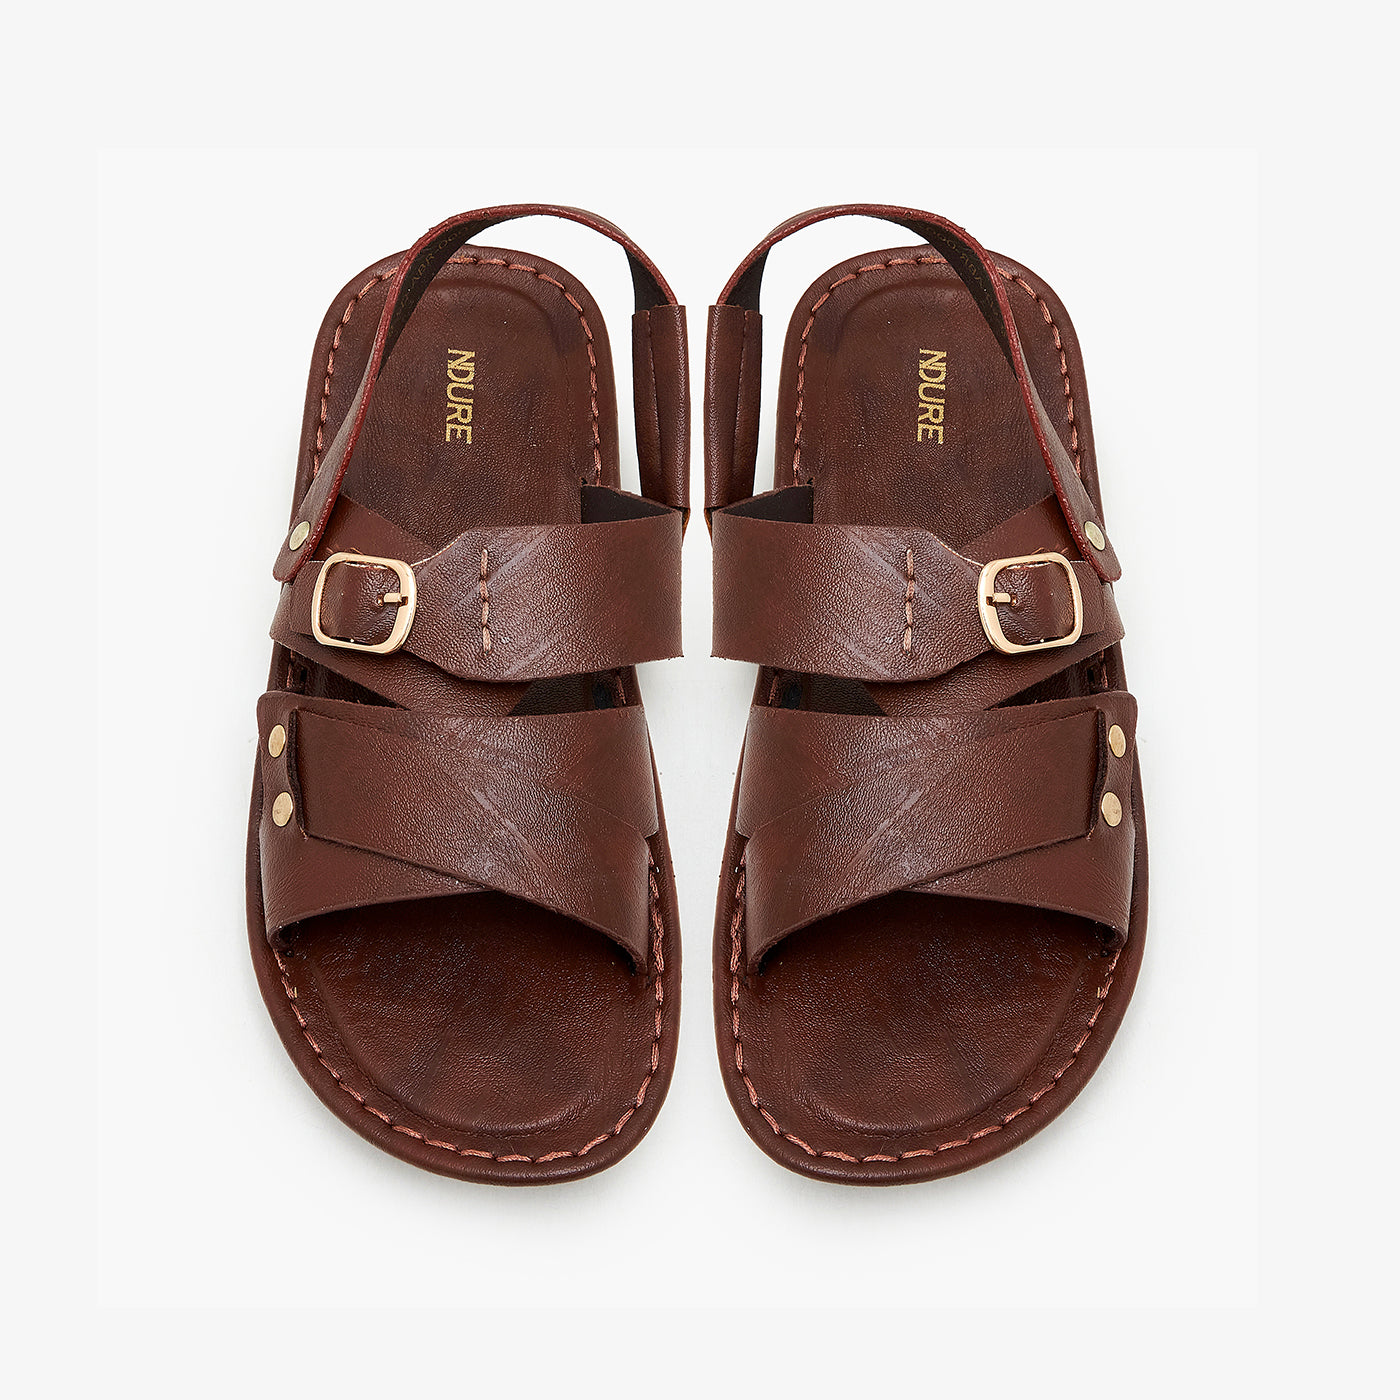 sandals for boys in Pakistan